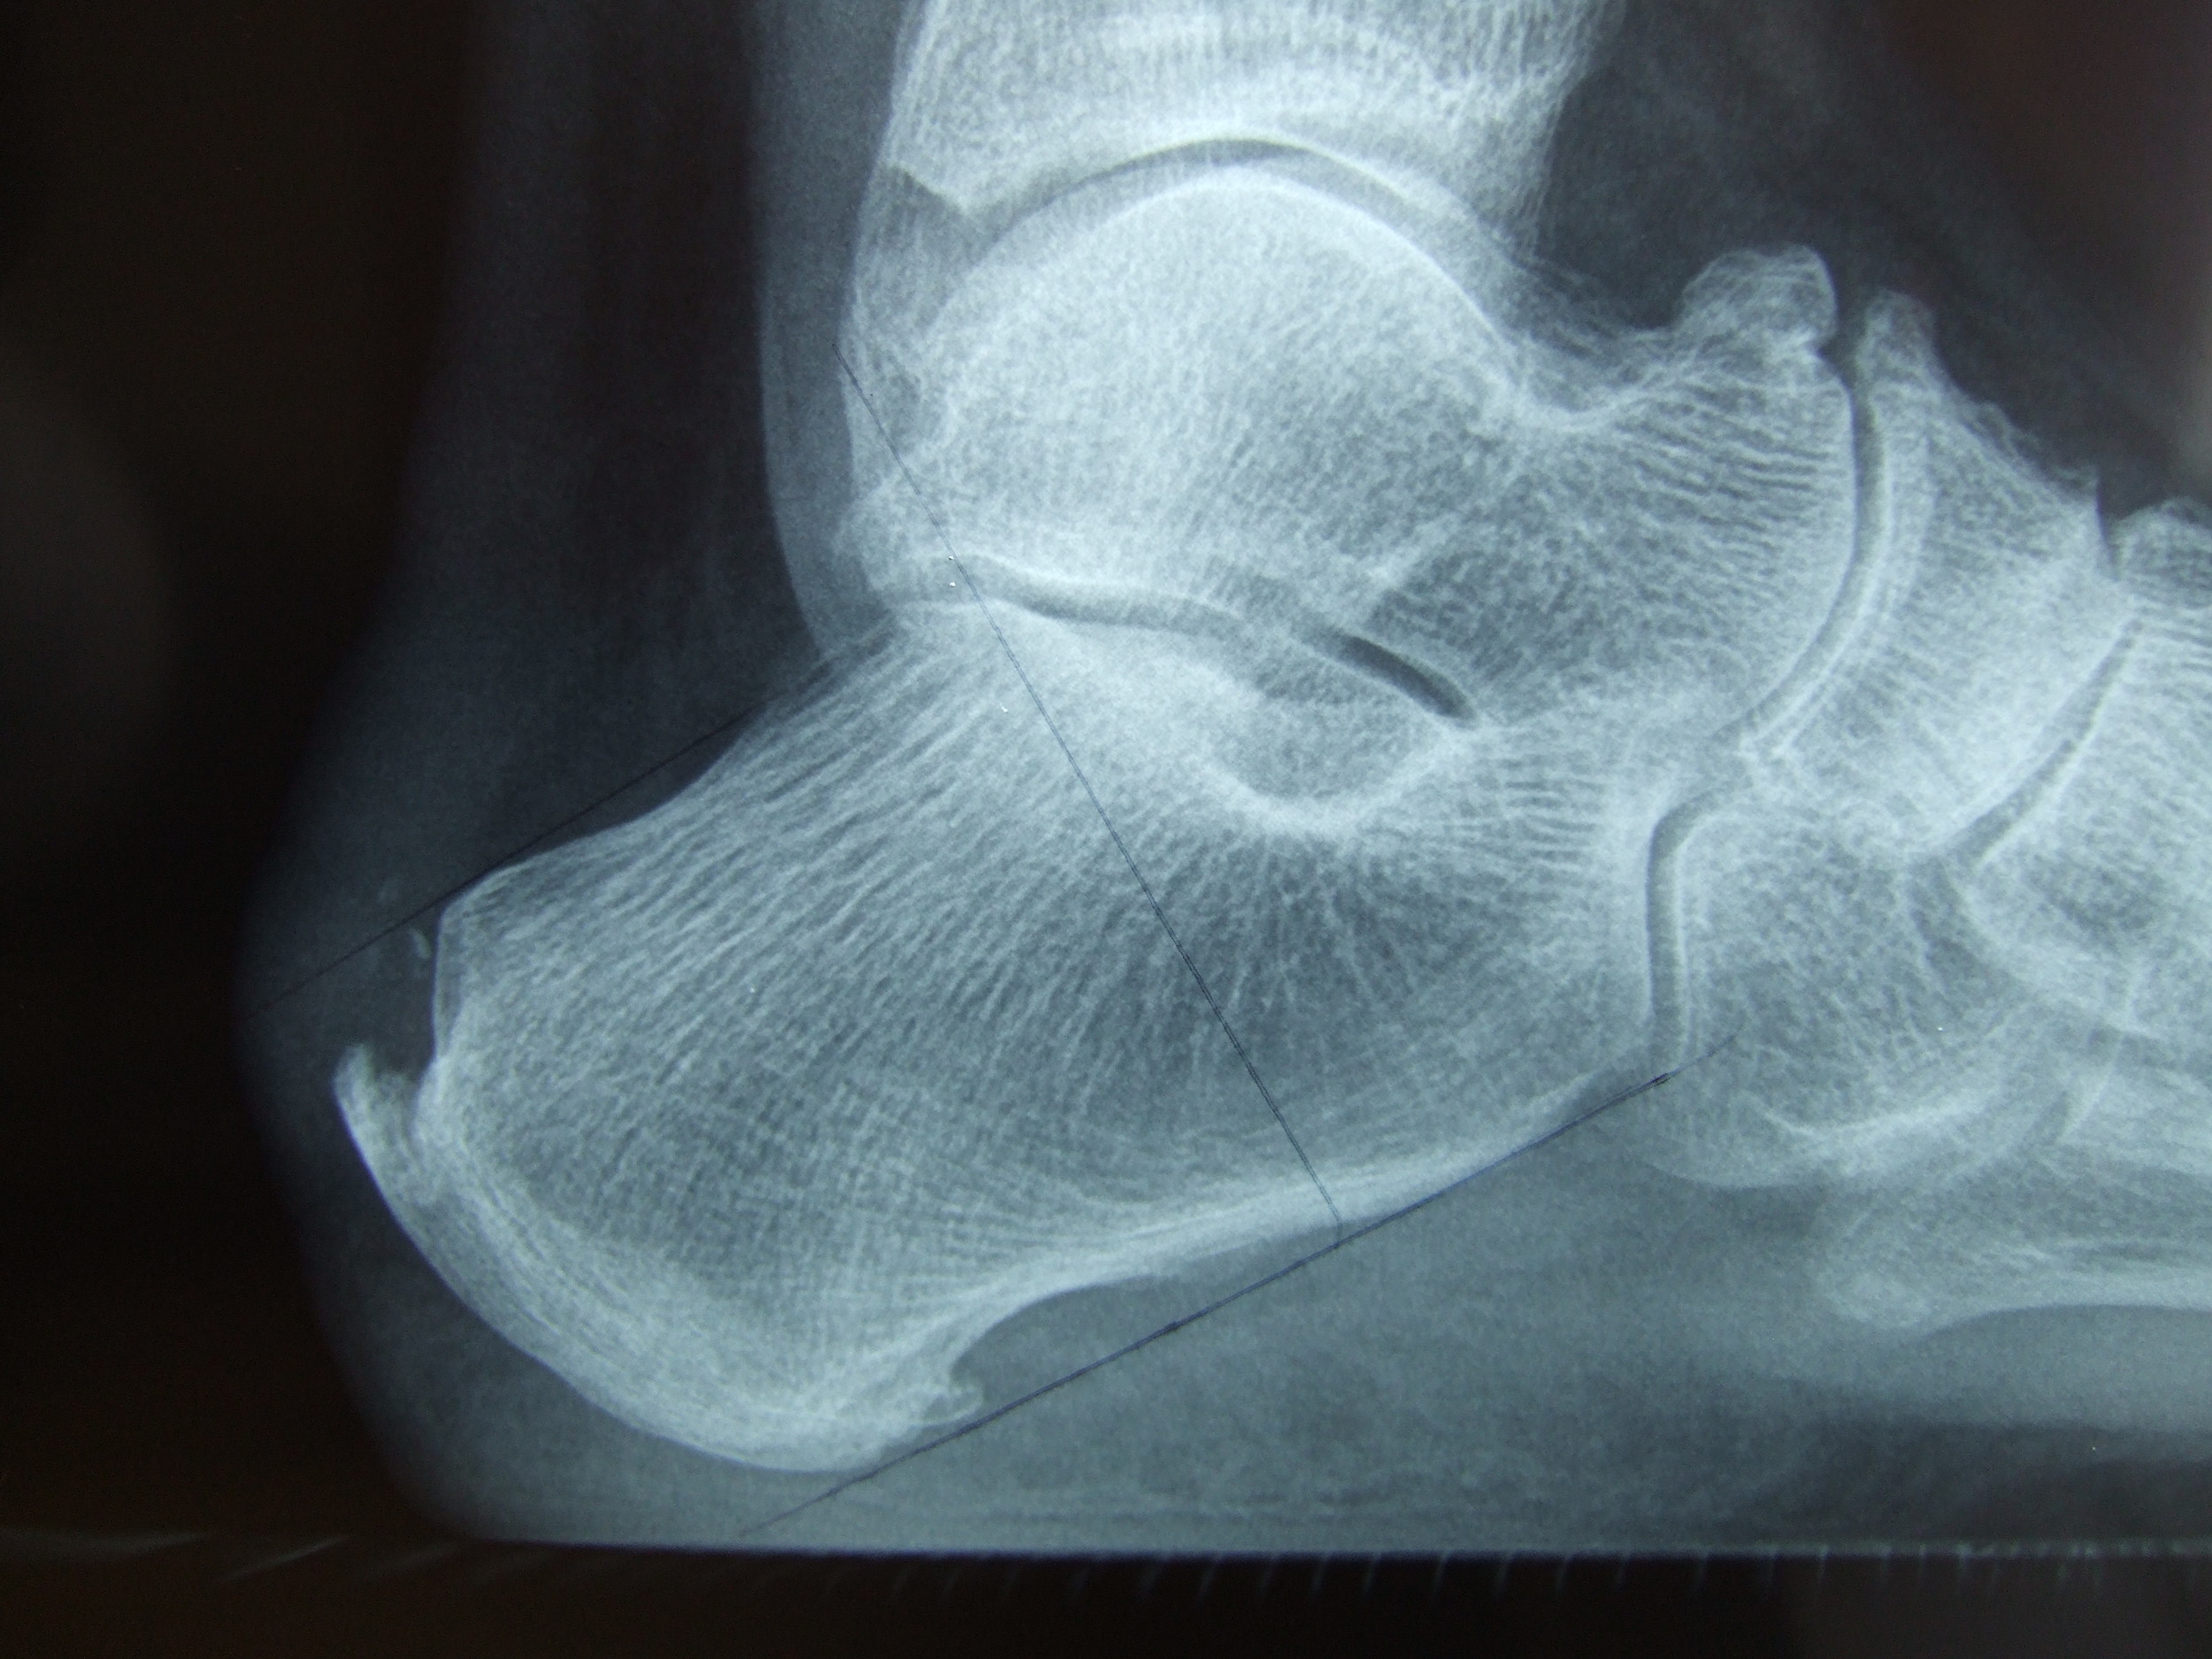 Fractures of the Heel Bone - Injuries and Poisoning - MSD Manual Consumer  Version